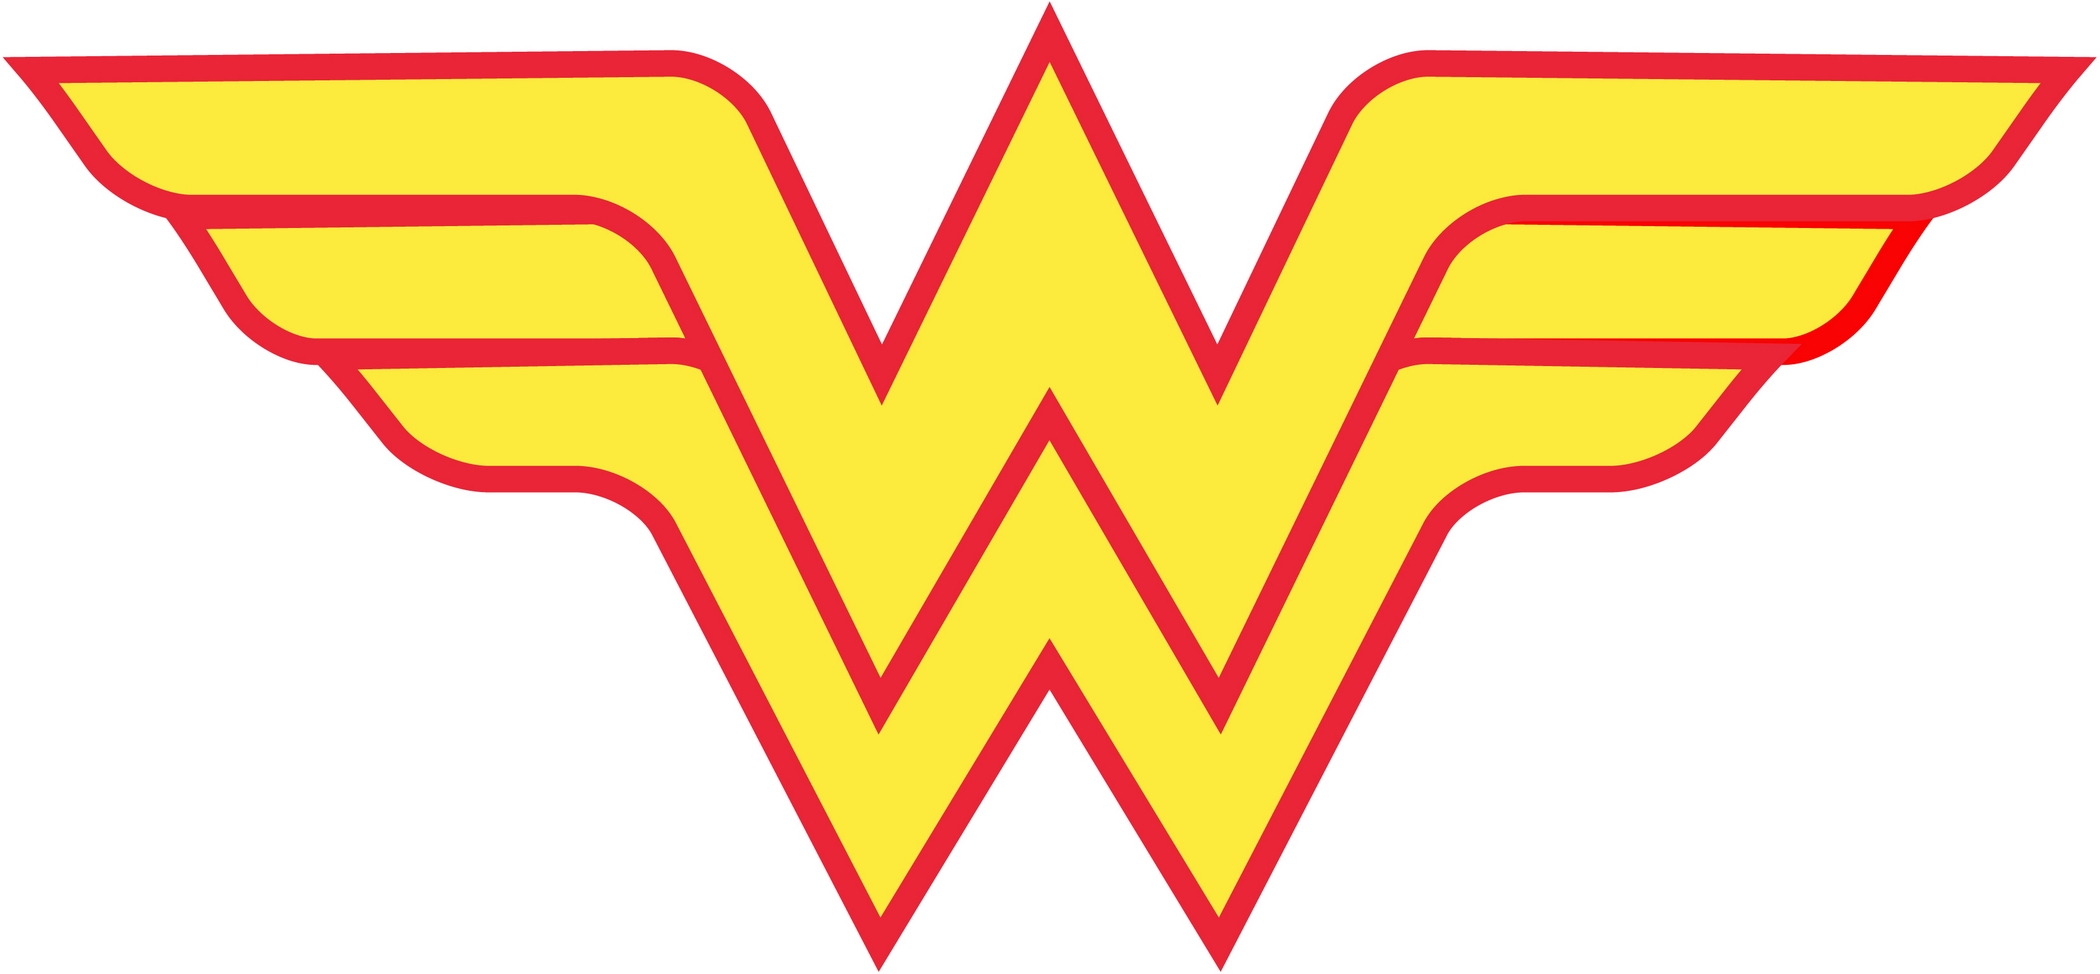 There Is 10 Wonder Woman Border   Free Cliparts All Used For Free